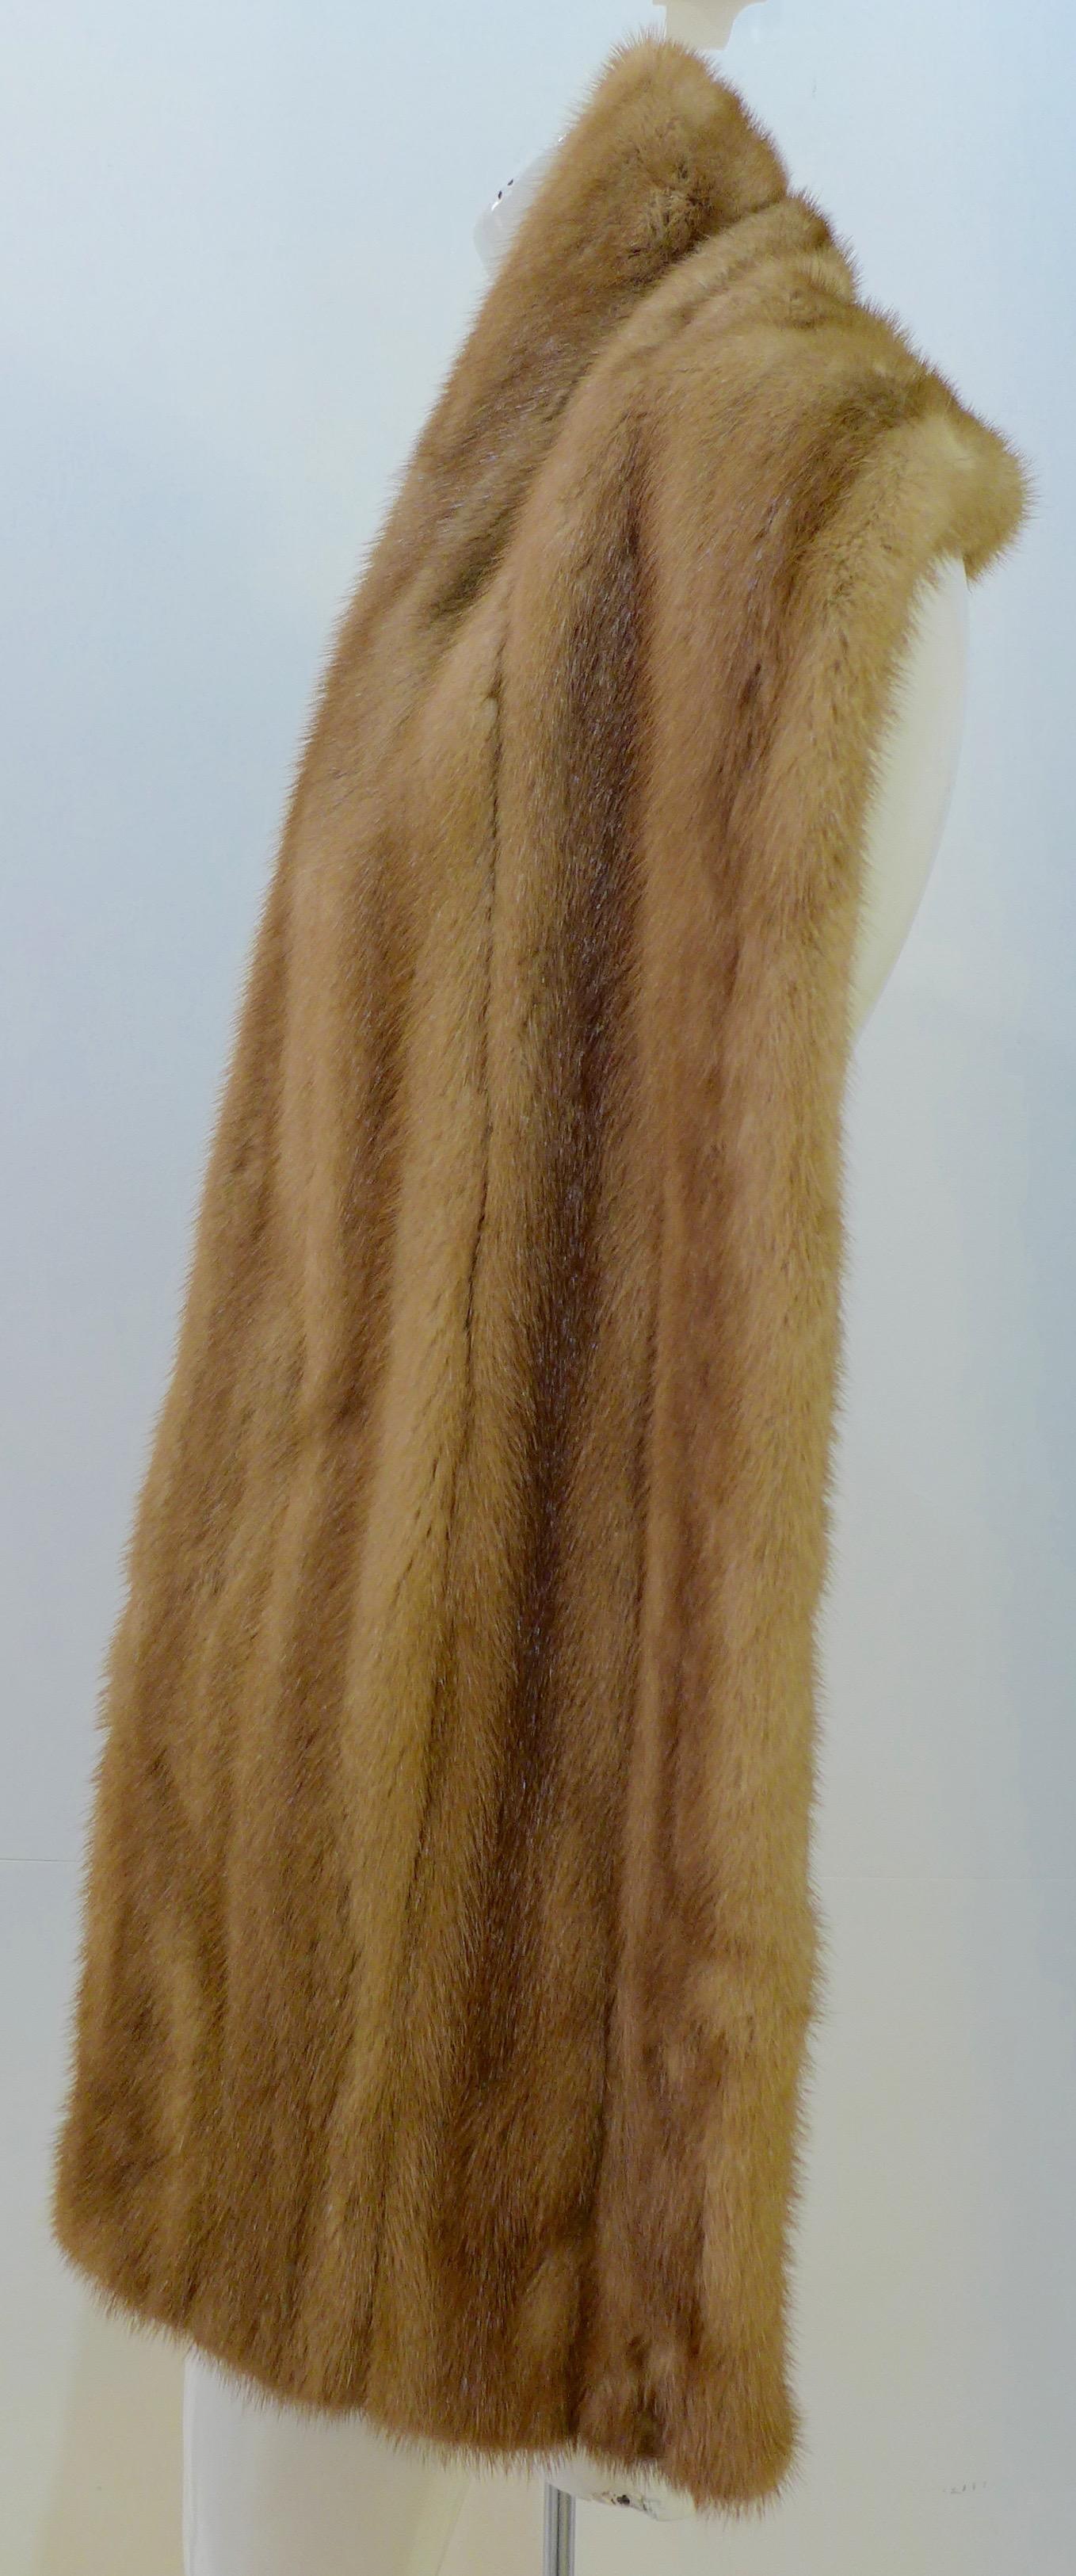 This real mink fur wrap is in great condition. It has a taupe satin lining and appliquéd monogram patches. 

Measurements in Inches:
Width: 11.5
Length: 72 